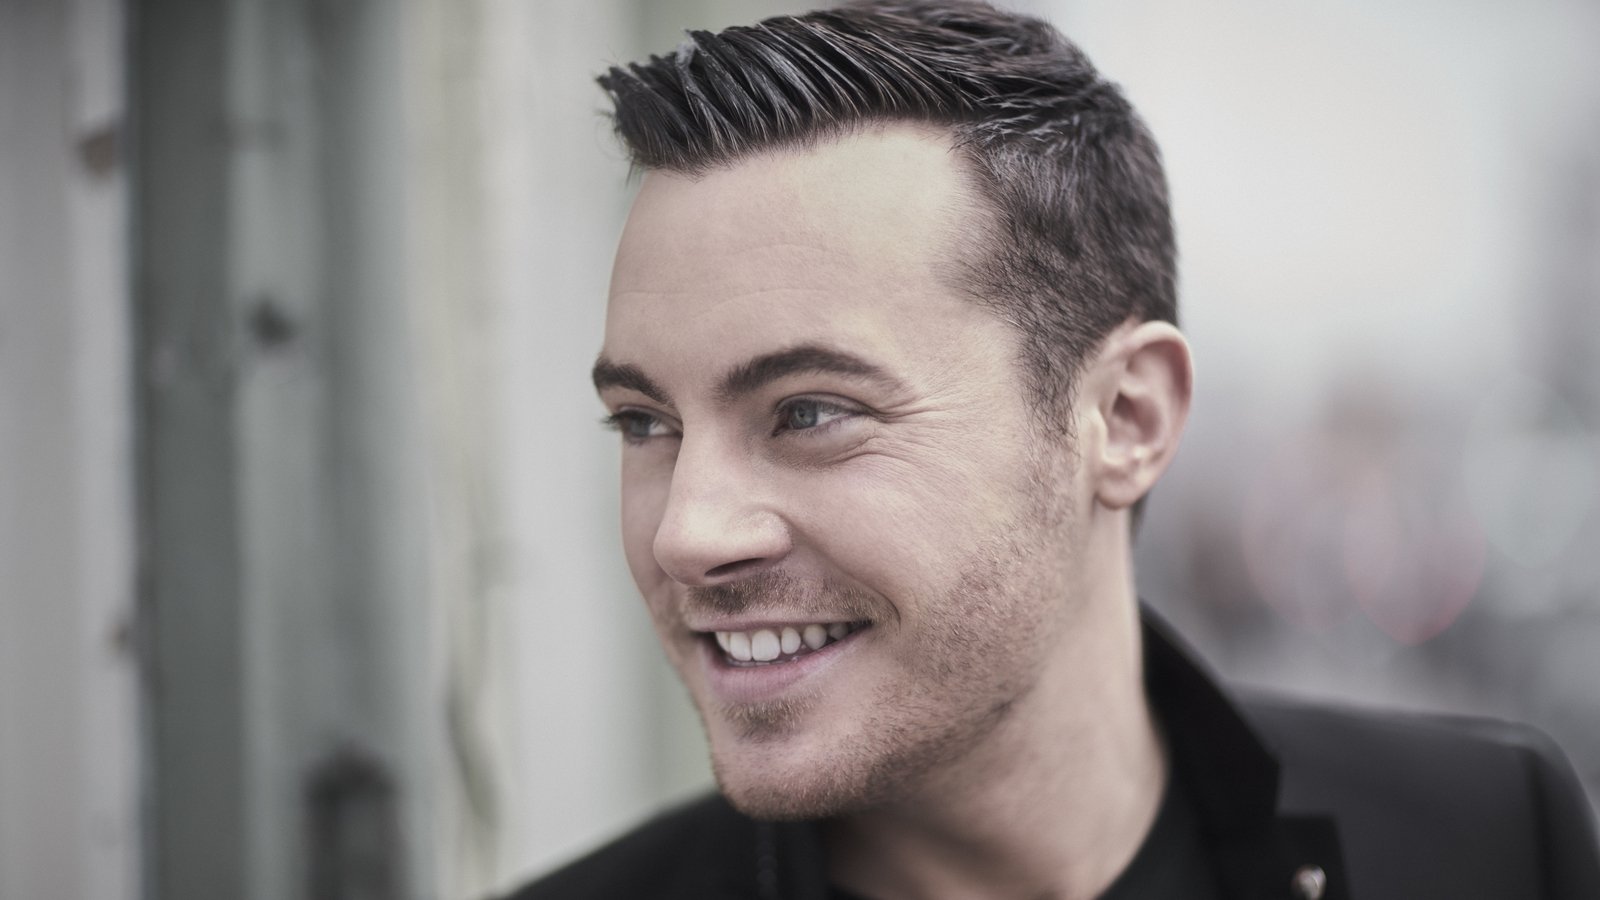 Exclusive See Nathan Carter's new video here first